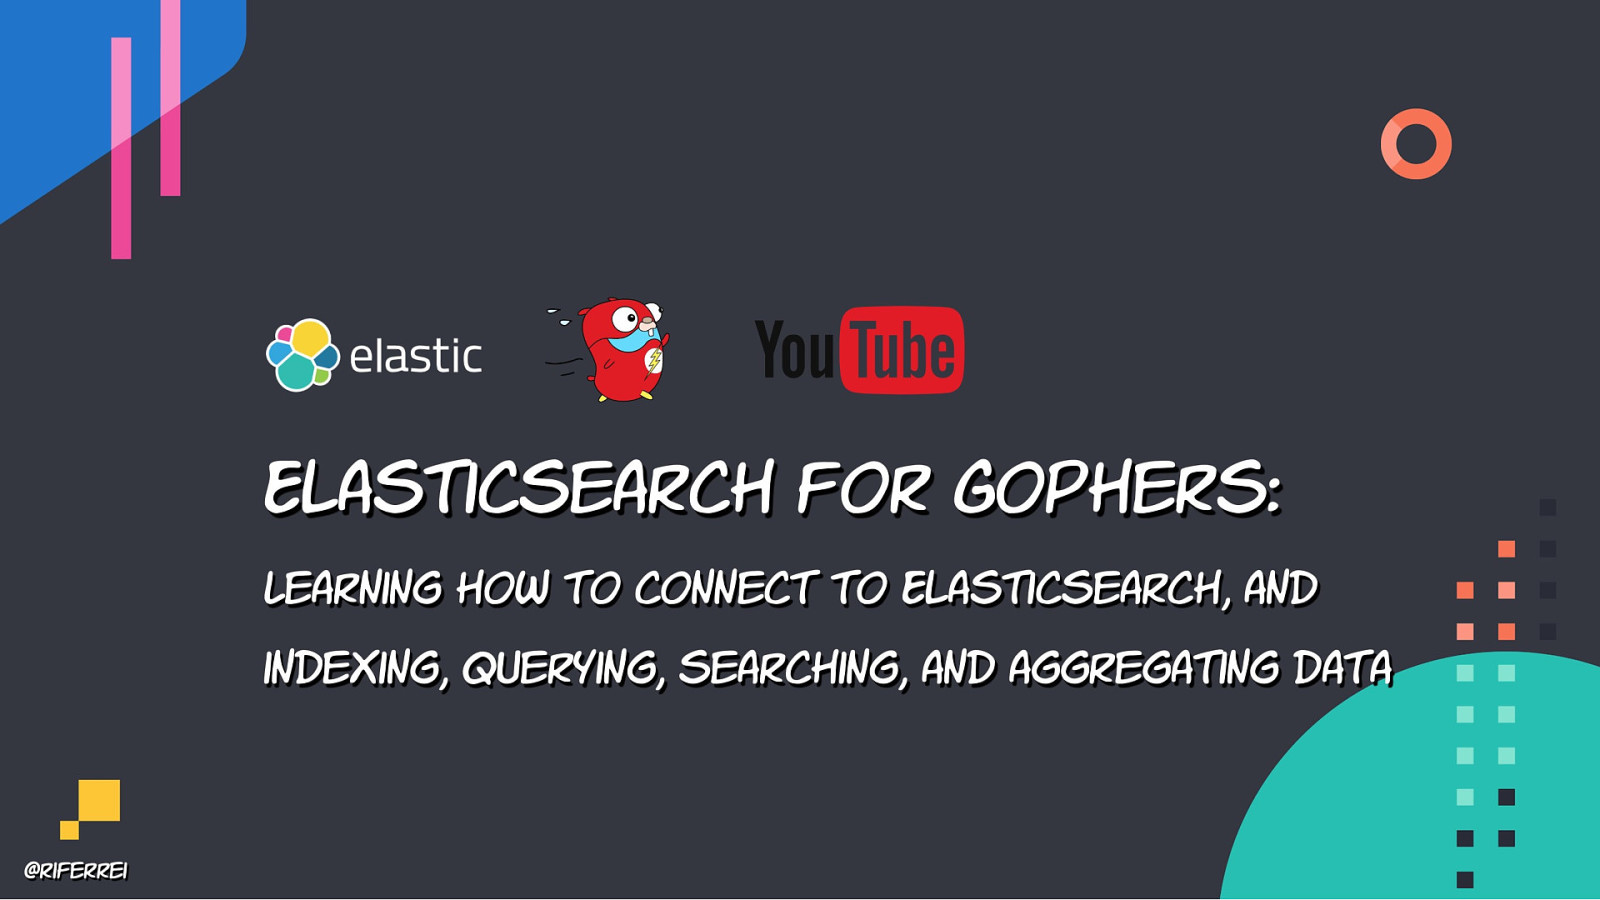 Elasticsearch for Gophers